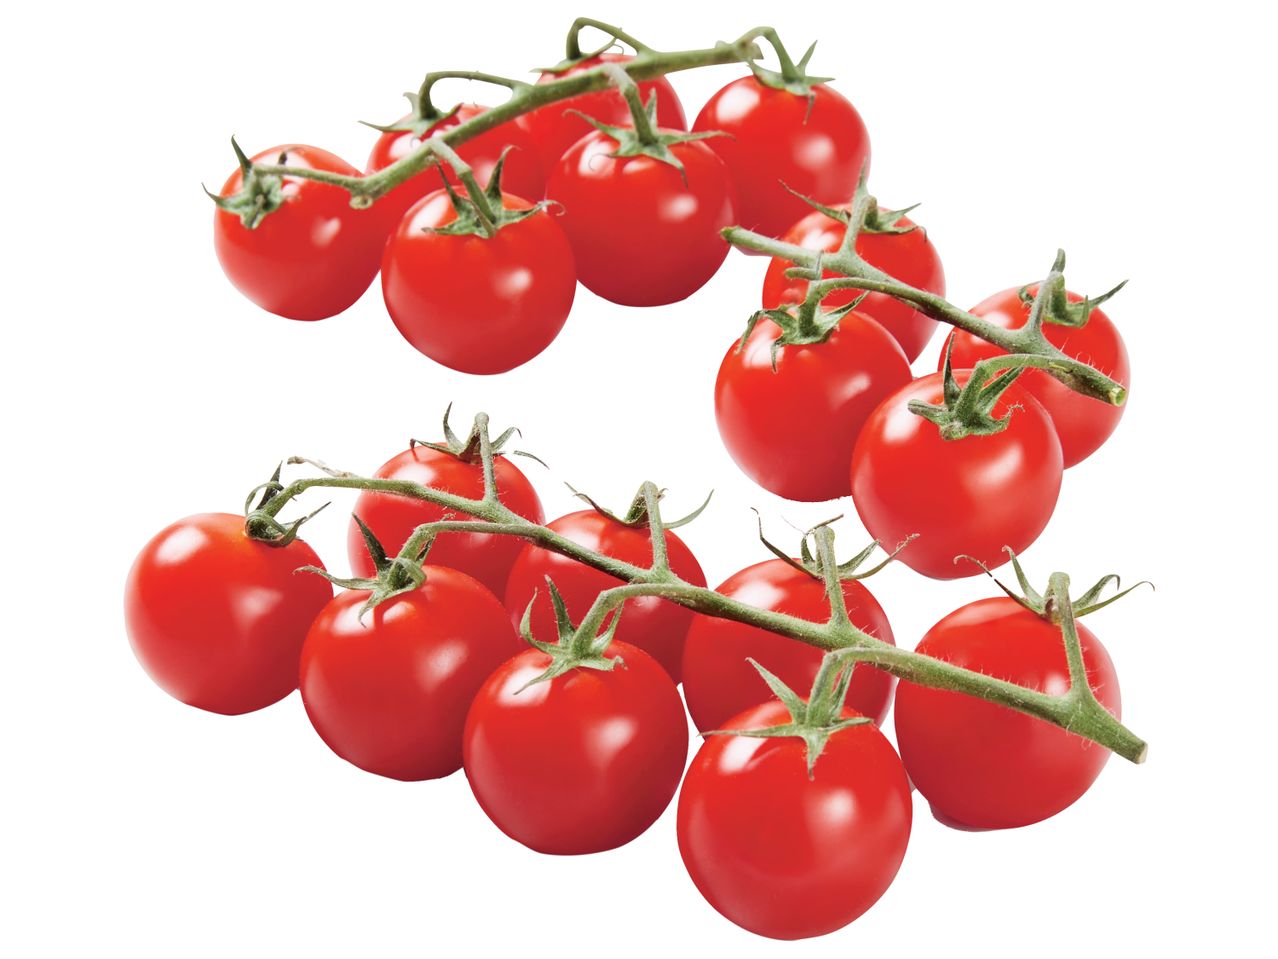 Go to full screen view: Oaklands Cherry Vine Tomatoes - Image 1